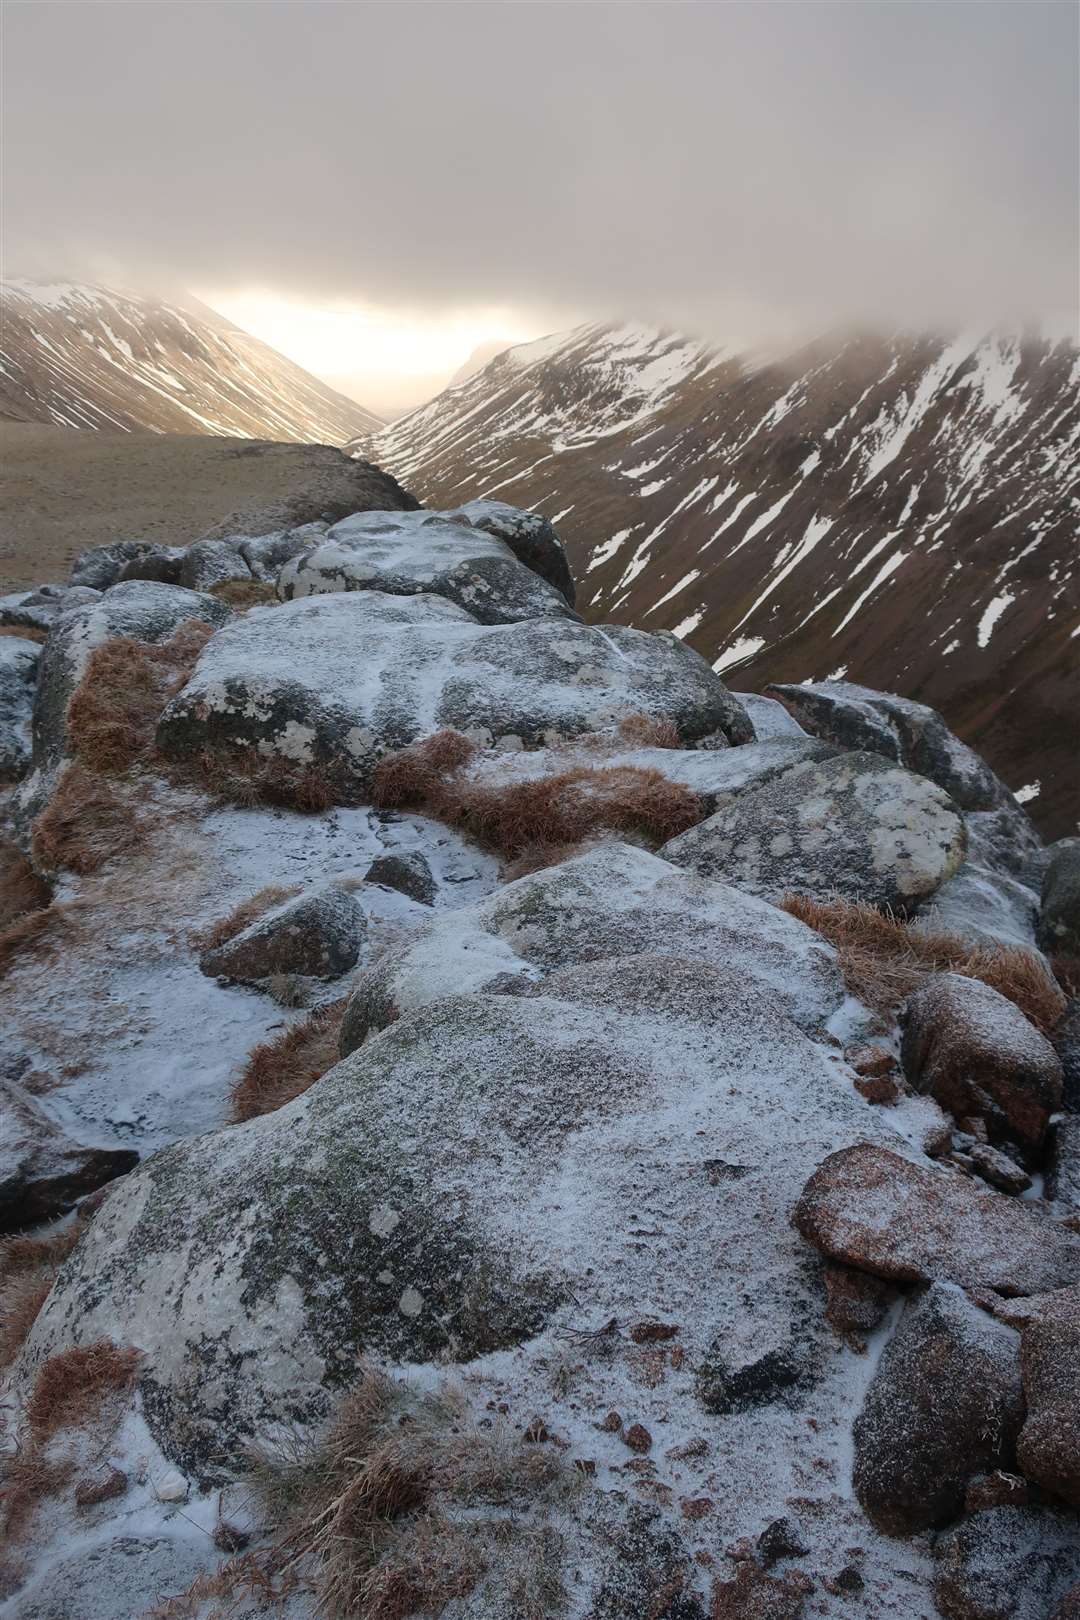 The Lairig Ghru from the top of Lurcher's Crag.